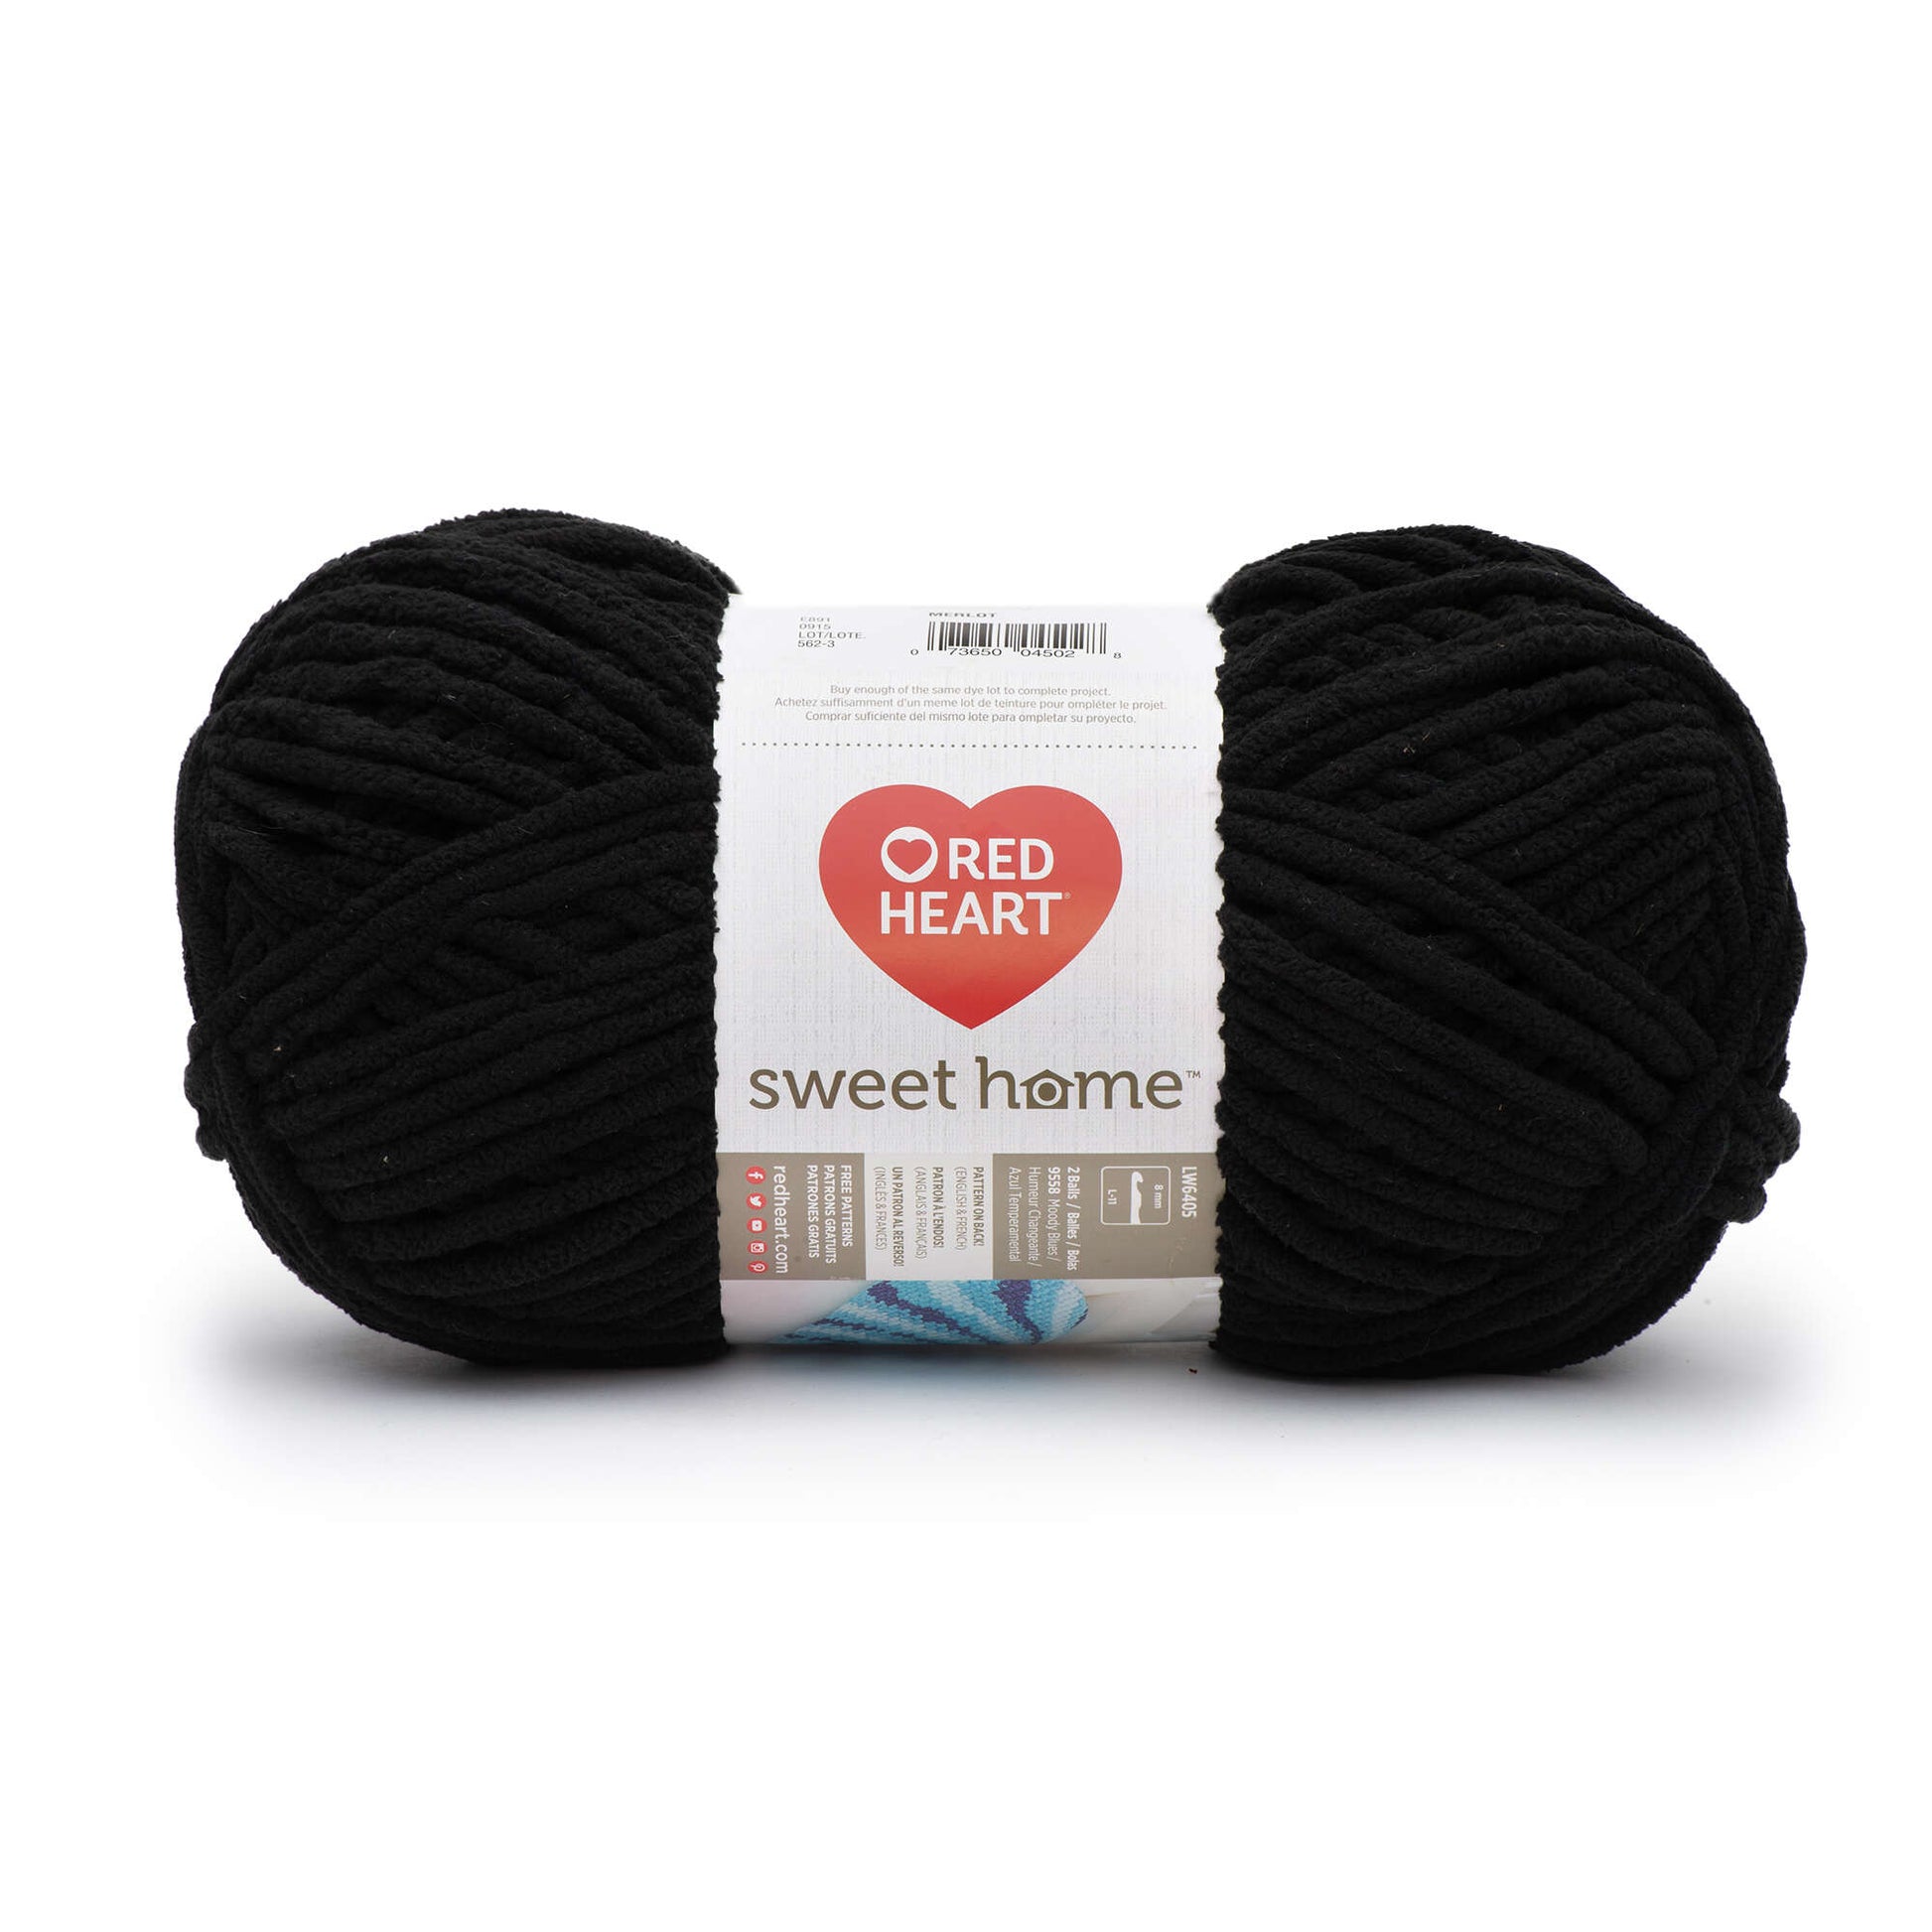 Red Heart Sweet Home Yarn - Clearance shades Ink